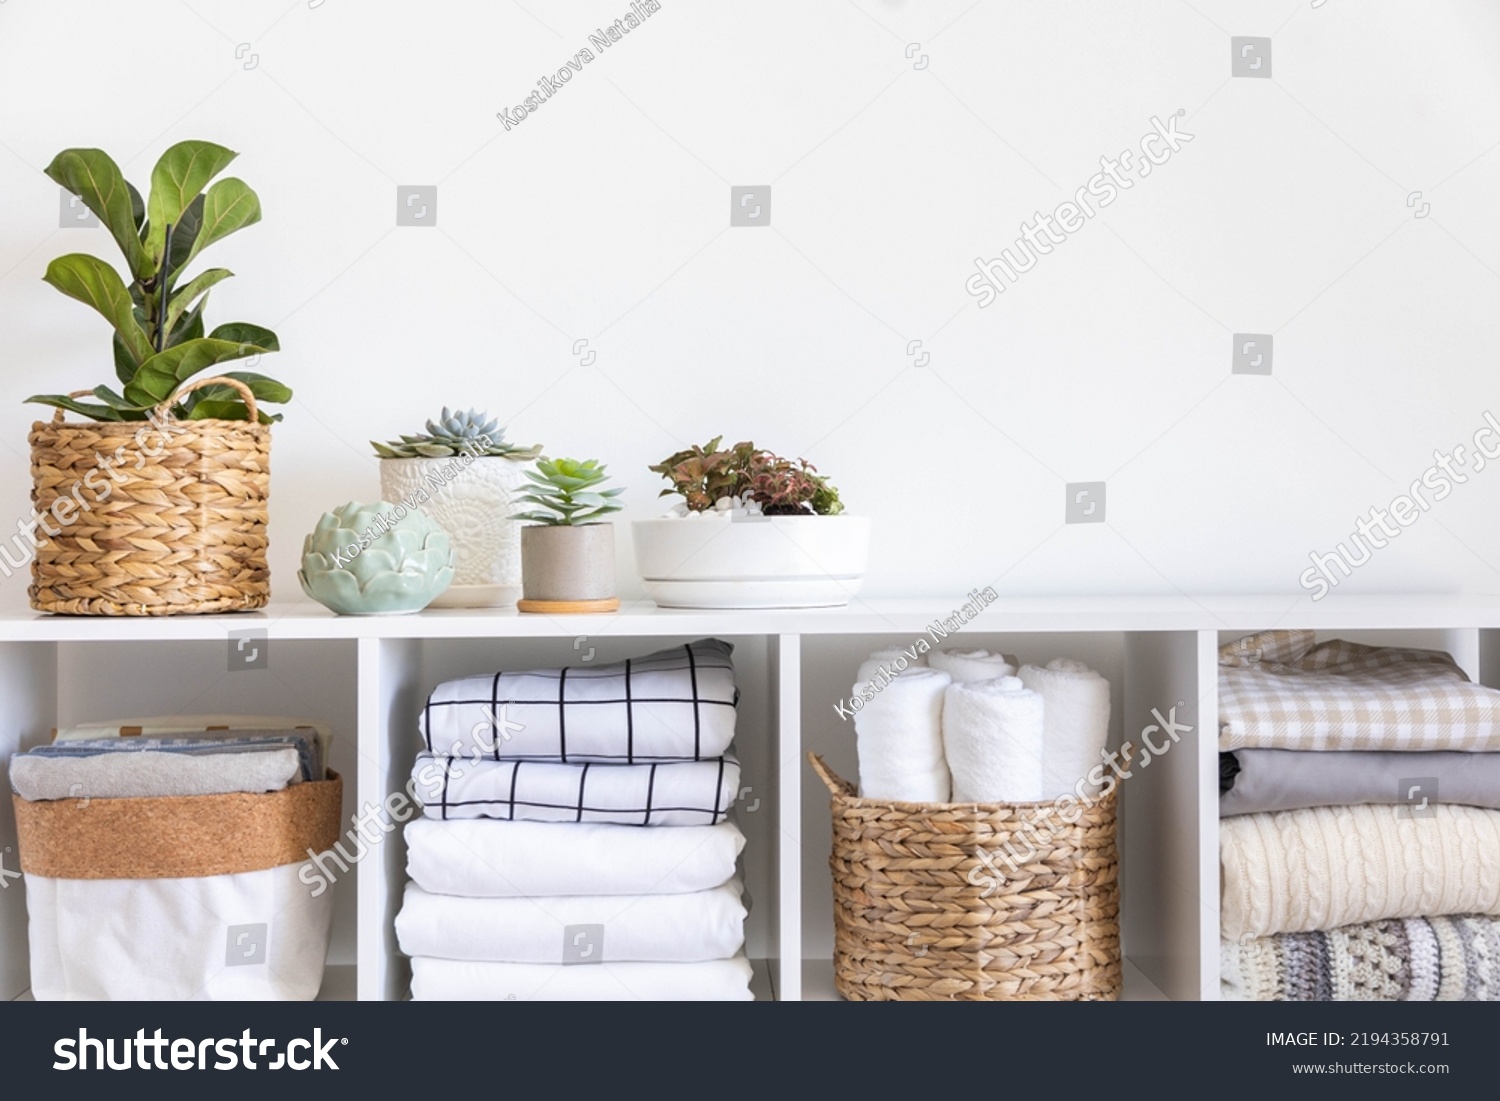 Potted plants in ecology straw baskets on shelf of bed linens cupboard textile arrangement storage organization. Minimalism Scandi placed method neatly folded cotton fabric bedding material copy space #2194358791